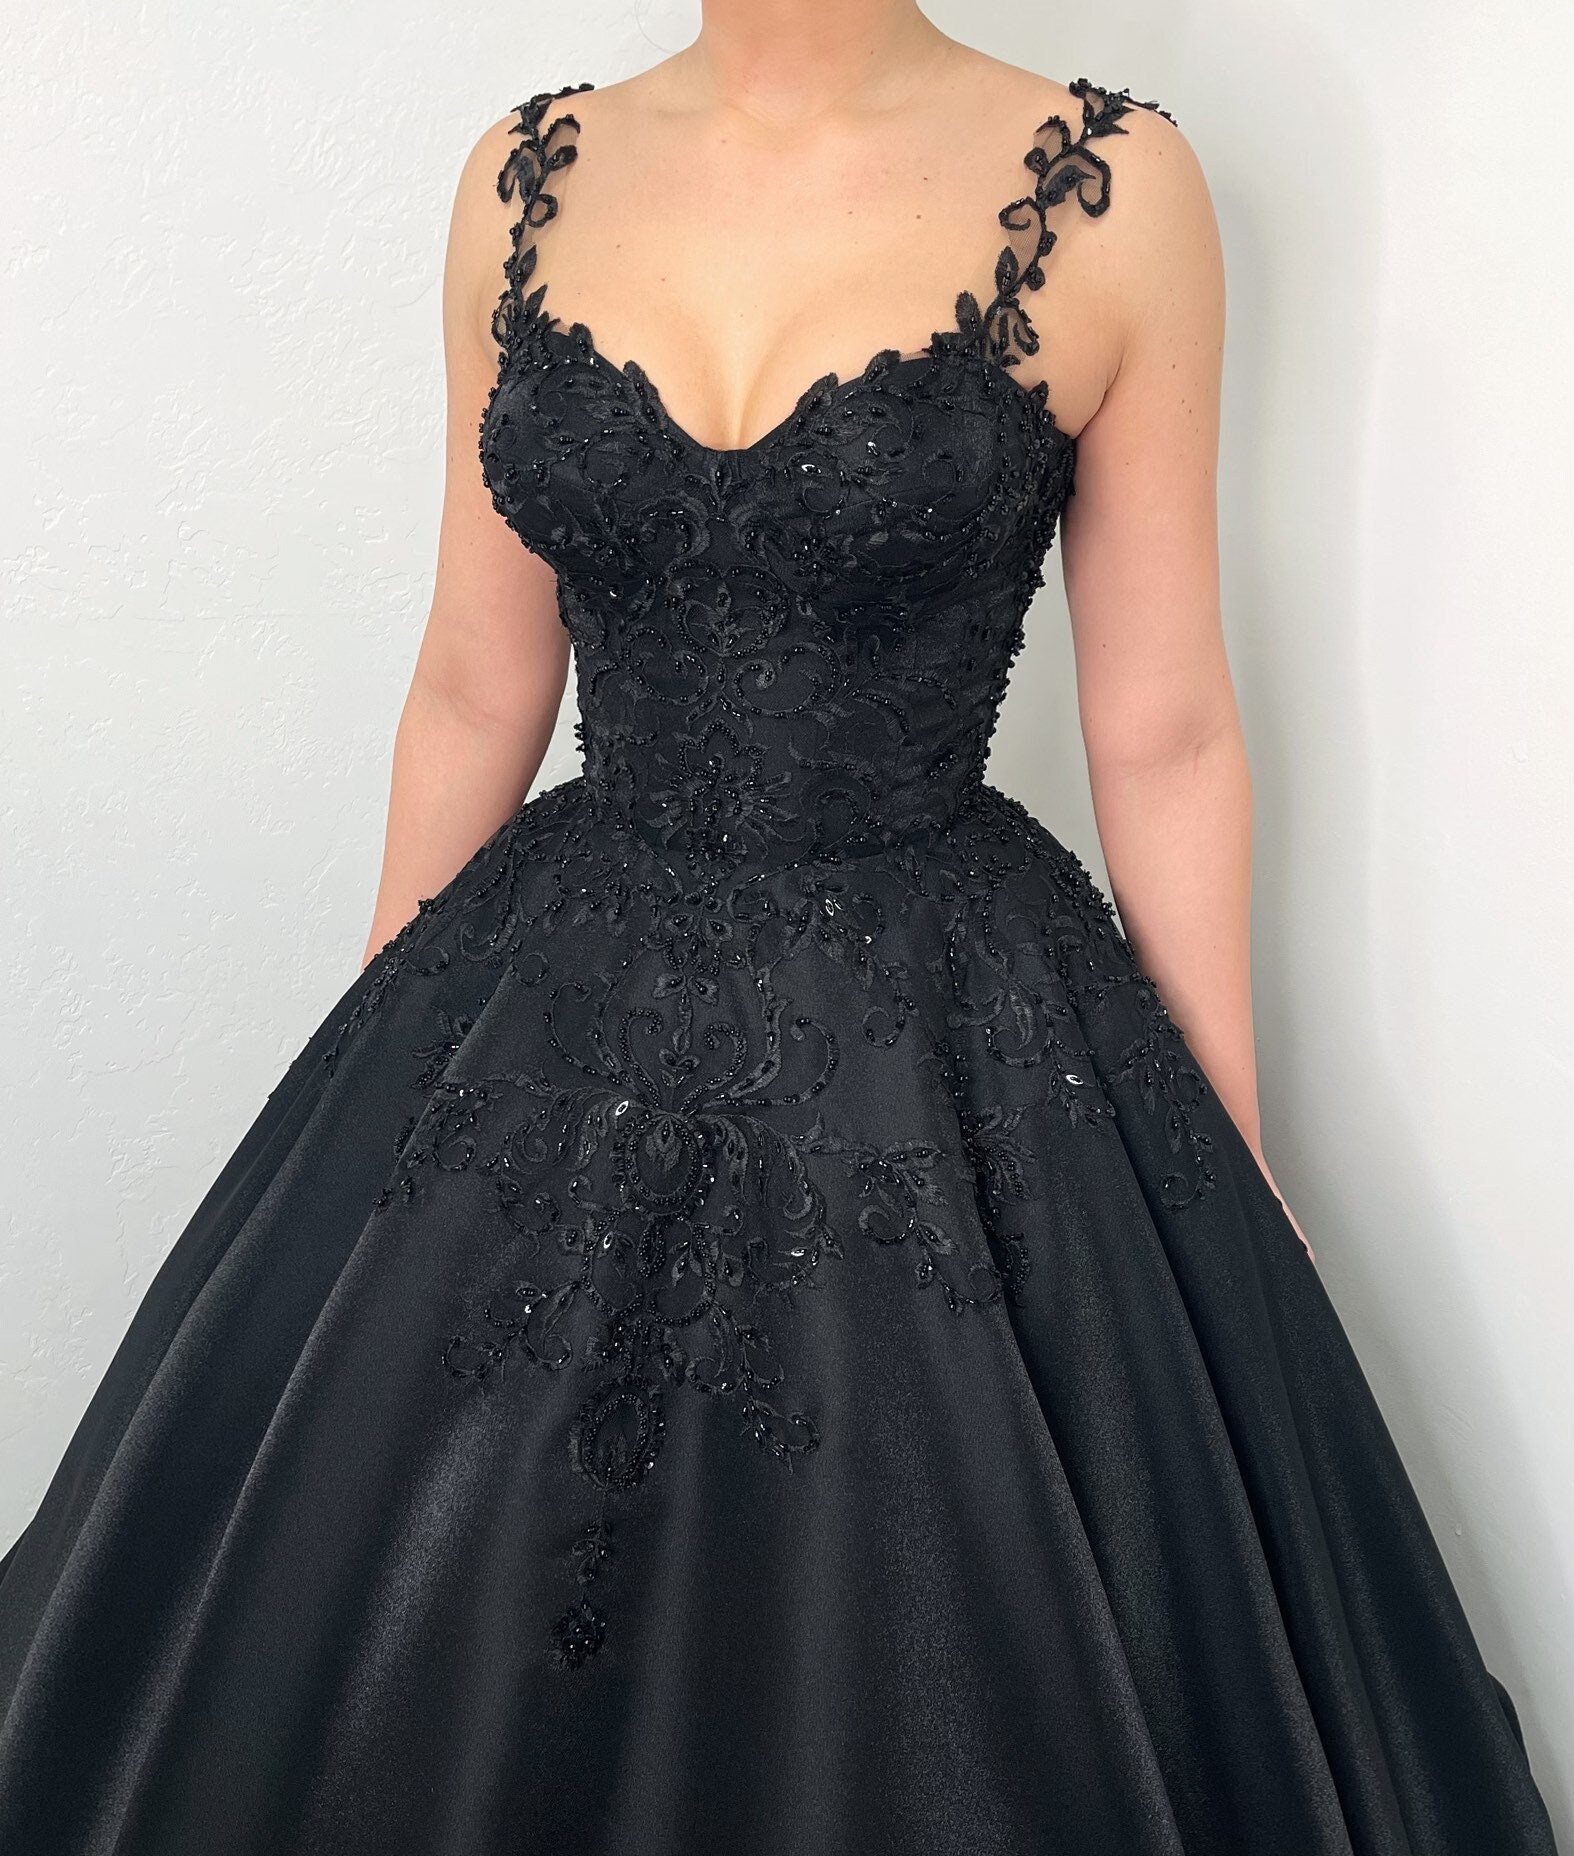 PFTFB Sweet 16 Dresses for Quinceanera Black Princess Off Shoulder Ball Gown  with Train Tulle Lace Pegeant Gowns Size 0 at Amazon Women's Clothing store